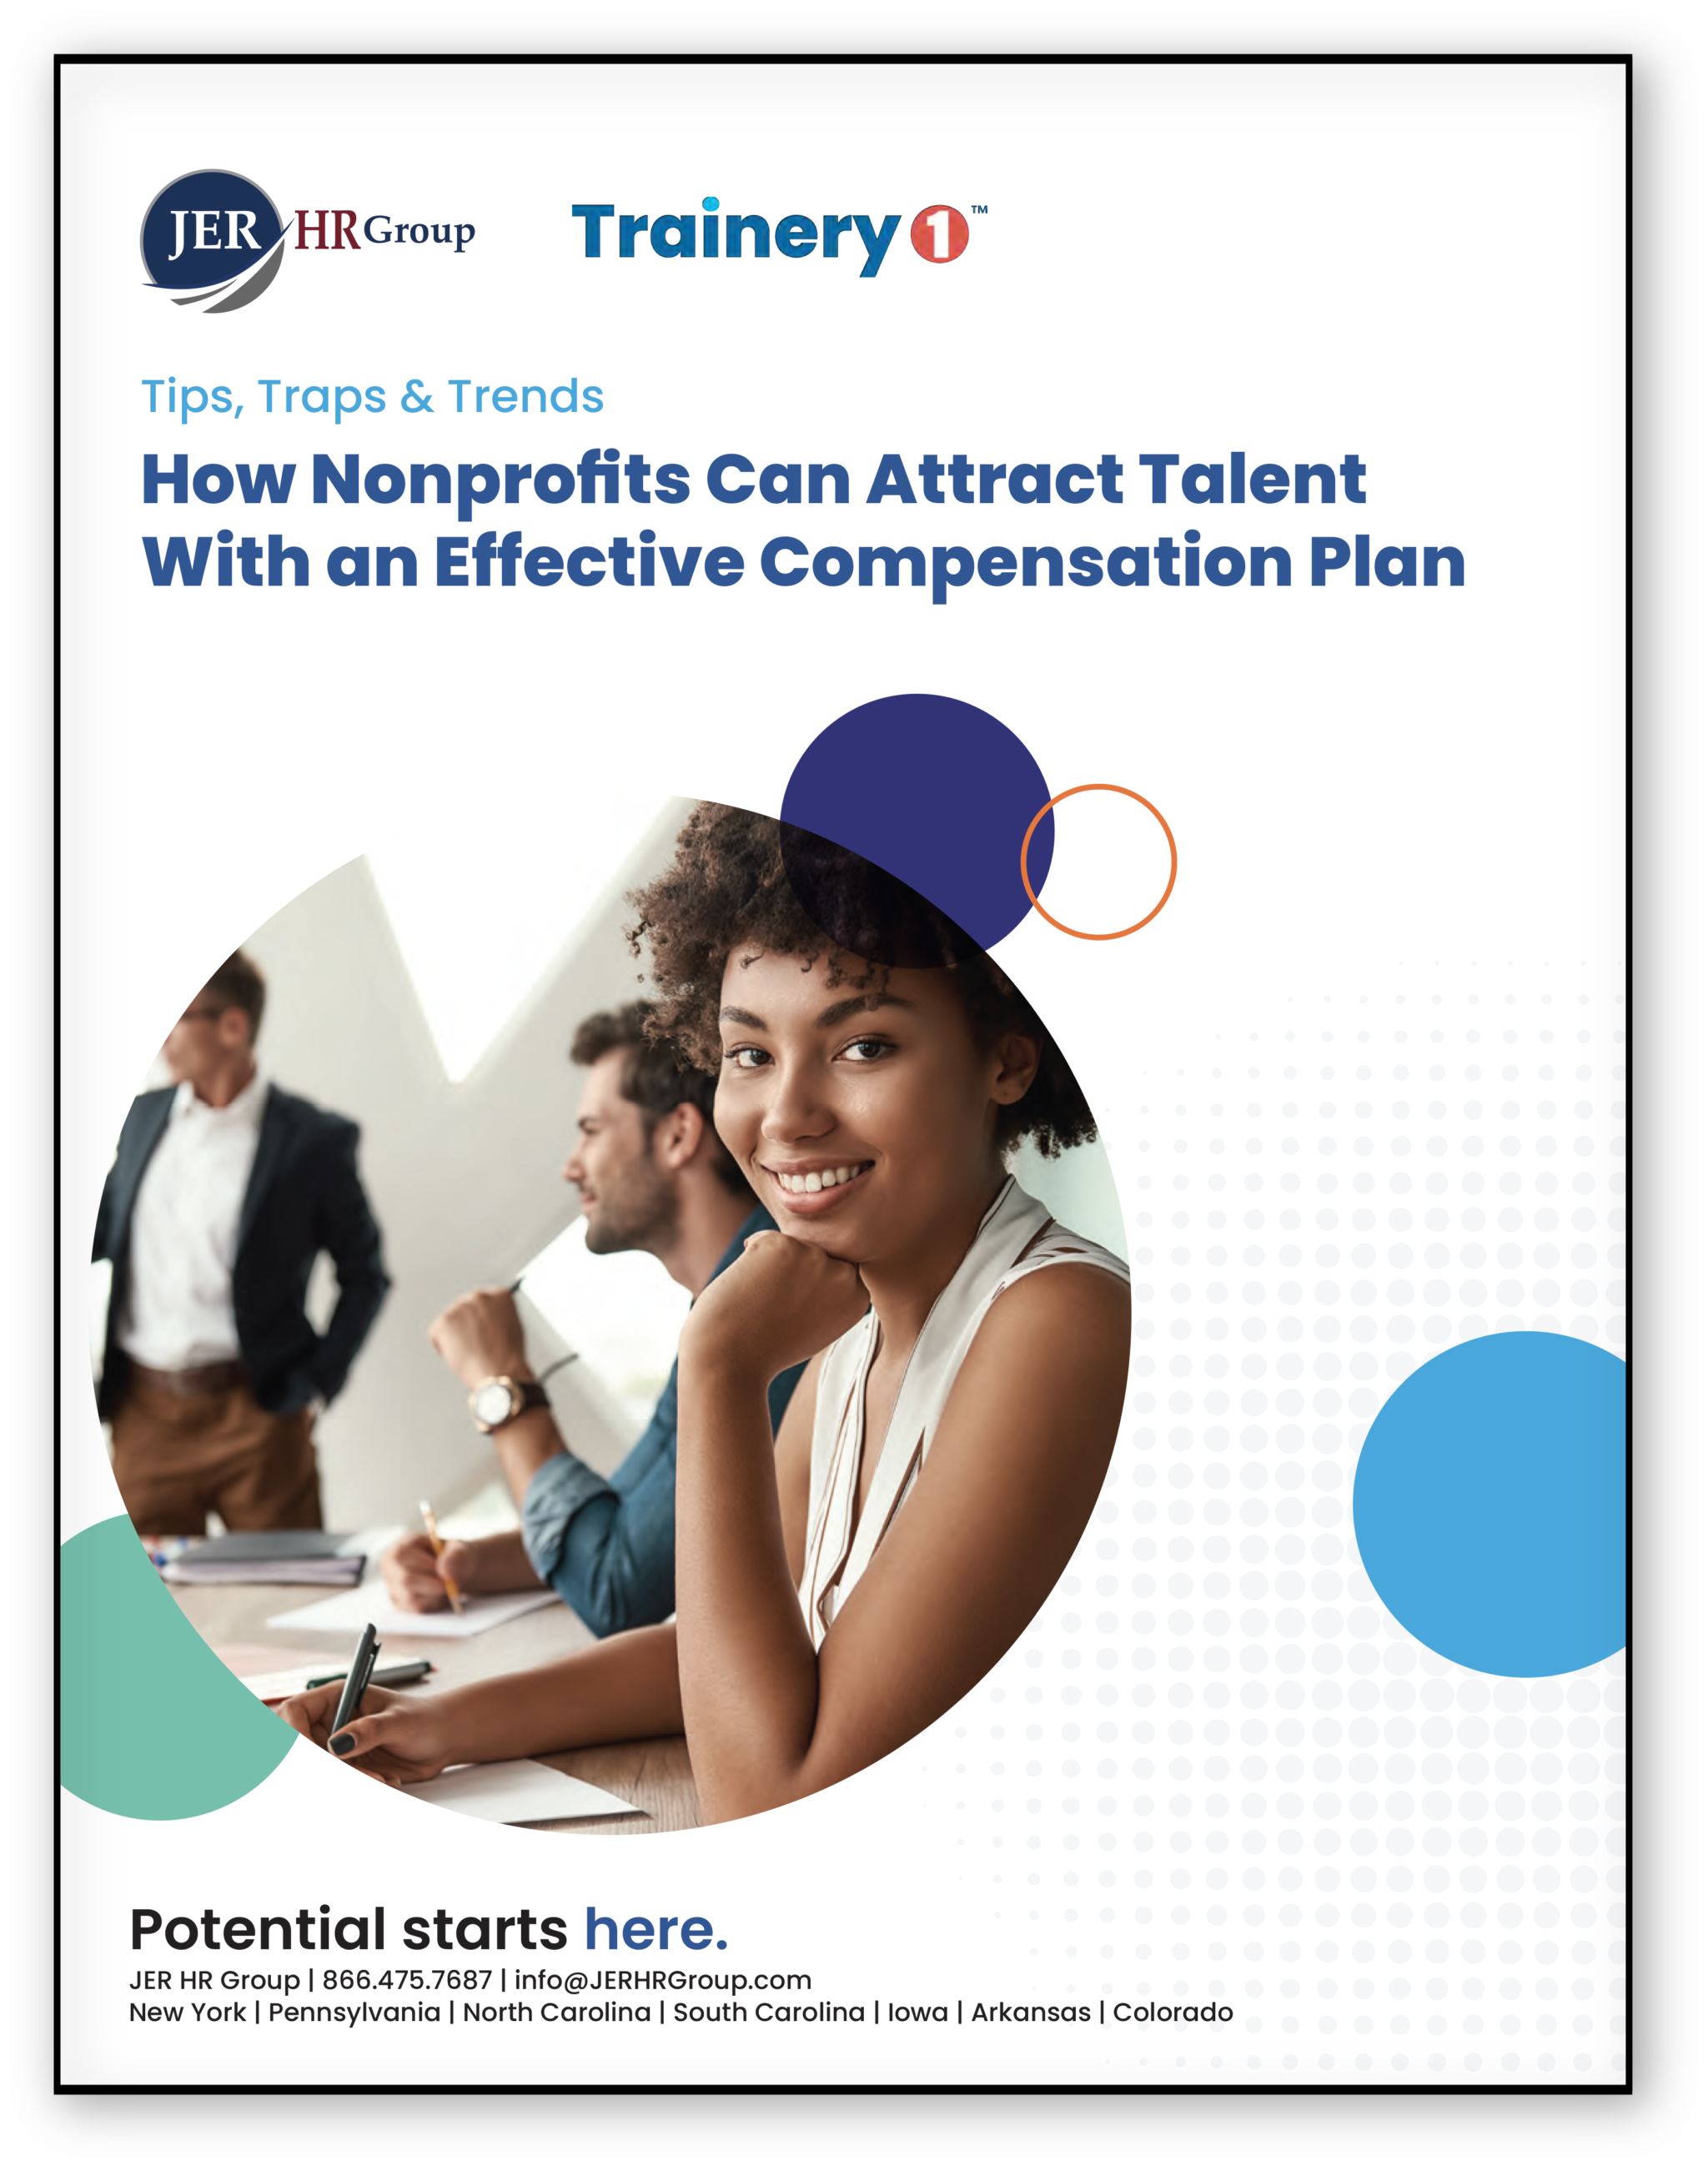 How Nonprofits Can Attract Talent with an Effective Compensation Plan